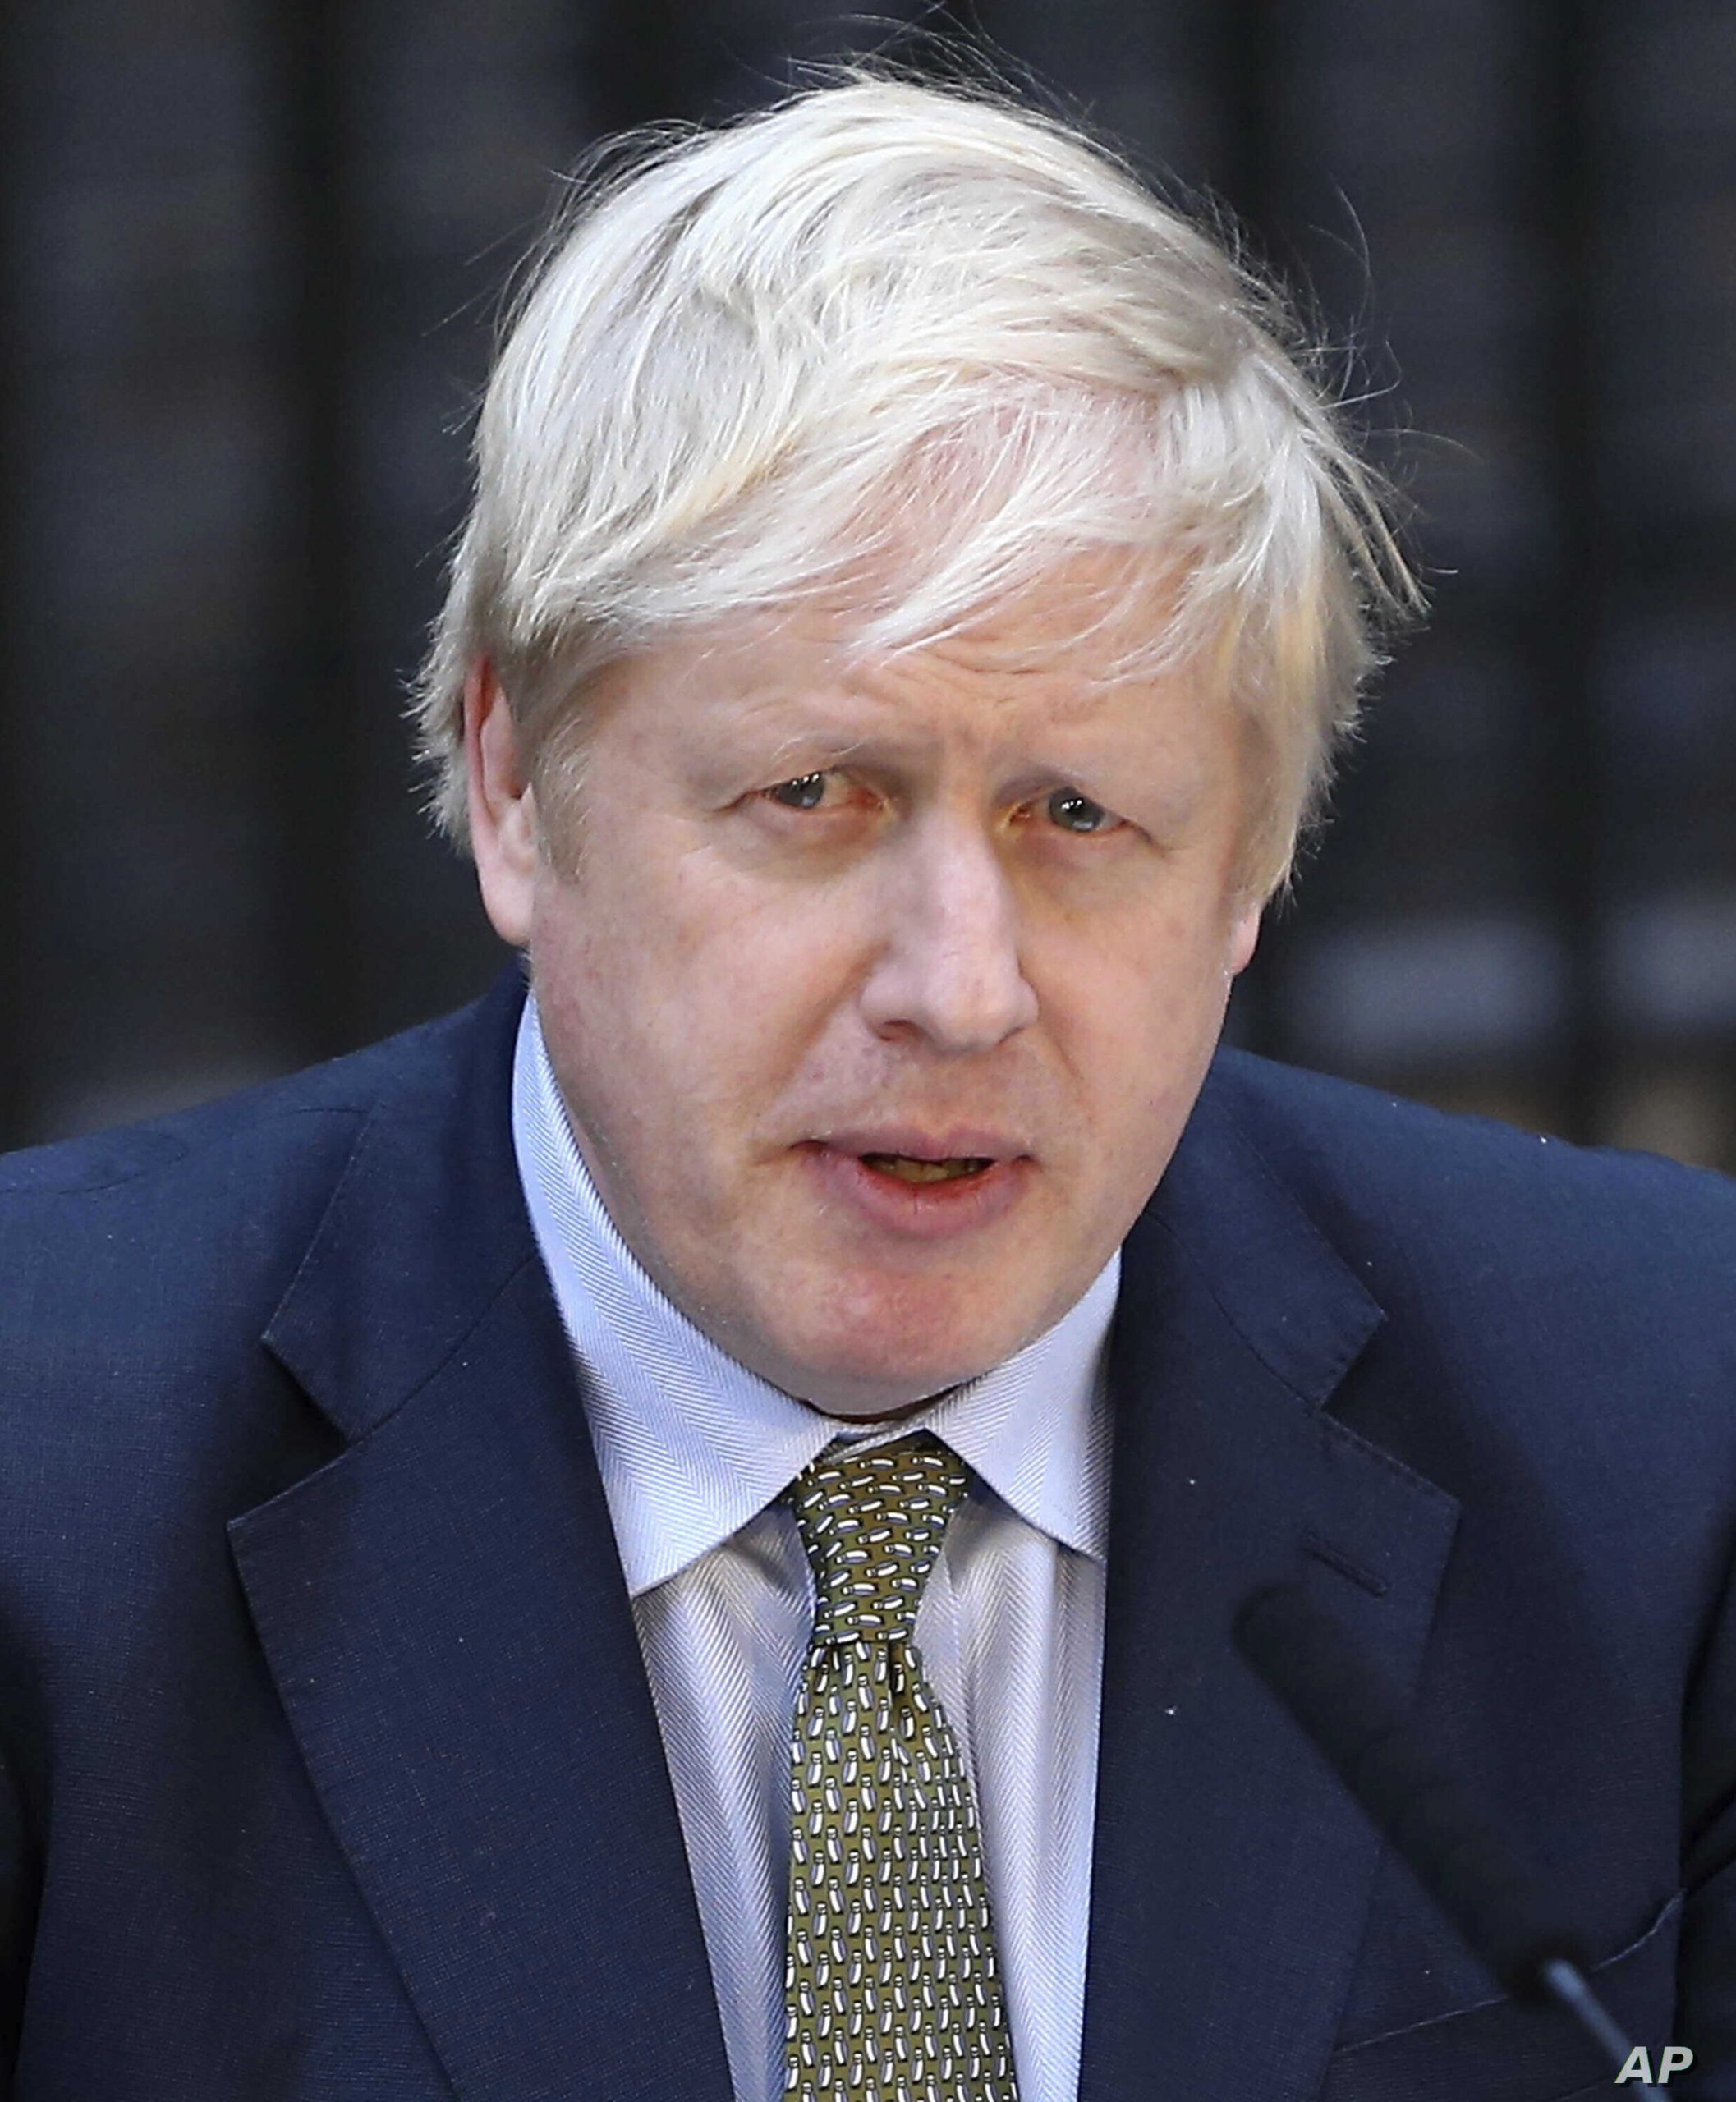 UK Prime Minister cautions Israeli counterpart against annexation